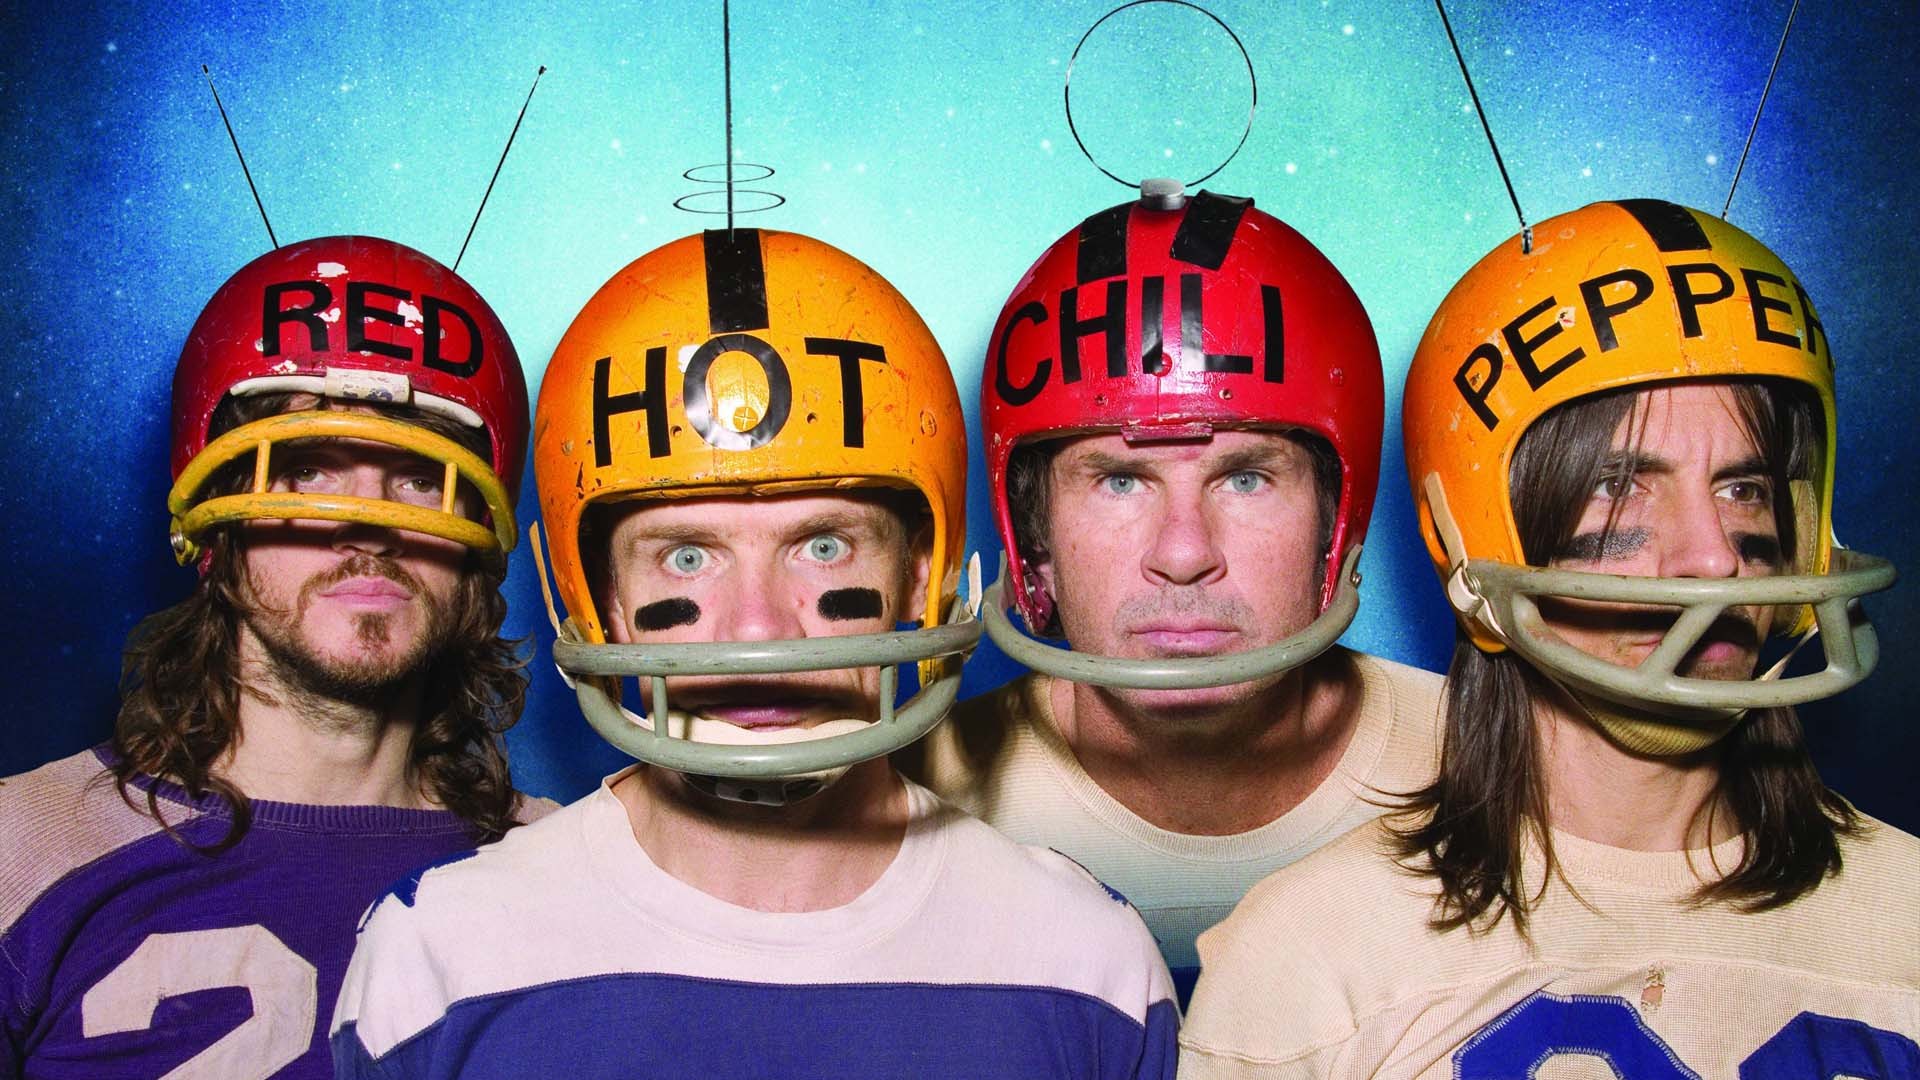 15435 Red Hot Chili Peppers Helmet Rock Bands 